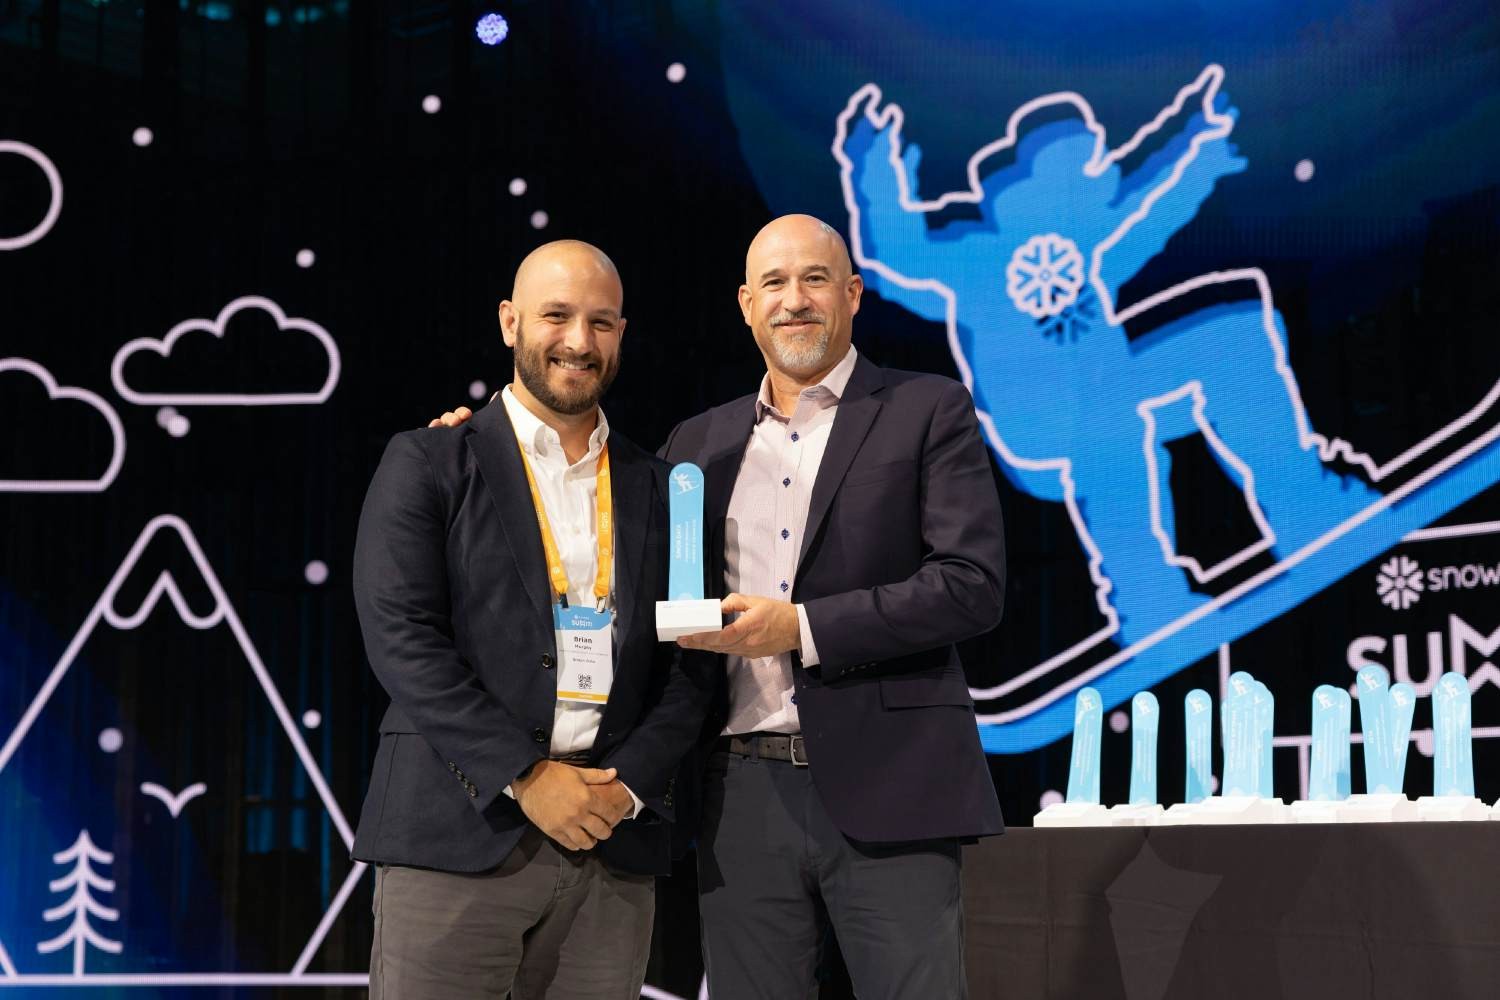 Our Head of Partnerships and Marketing accepting the Partner of the Year Award at the 2023 Snowflake Summit